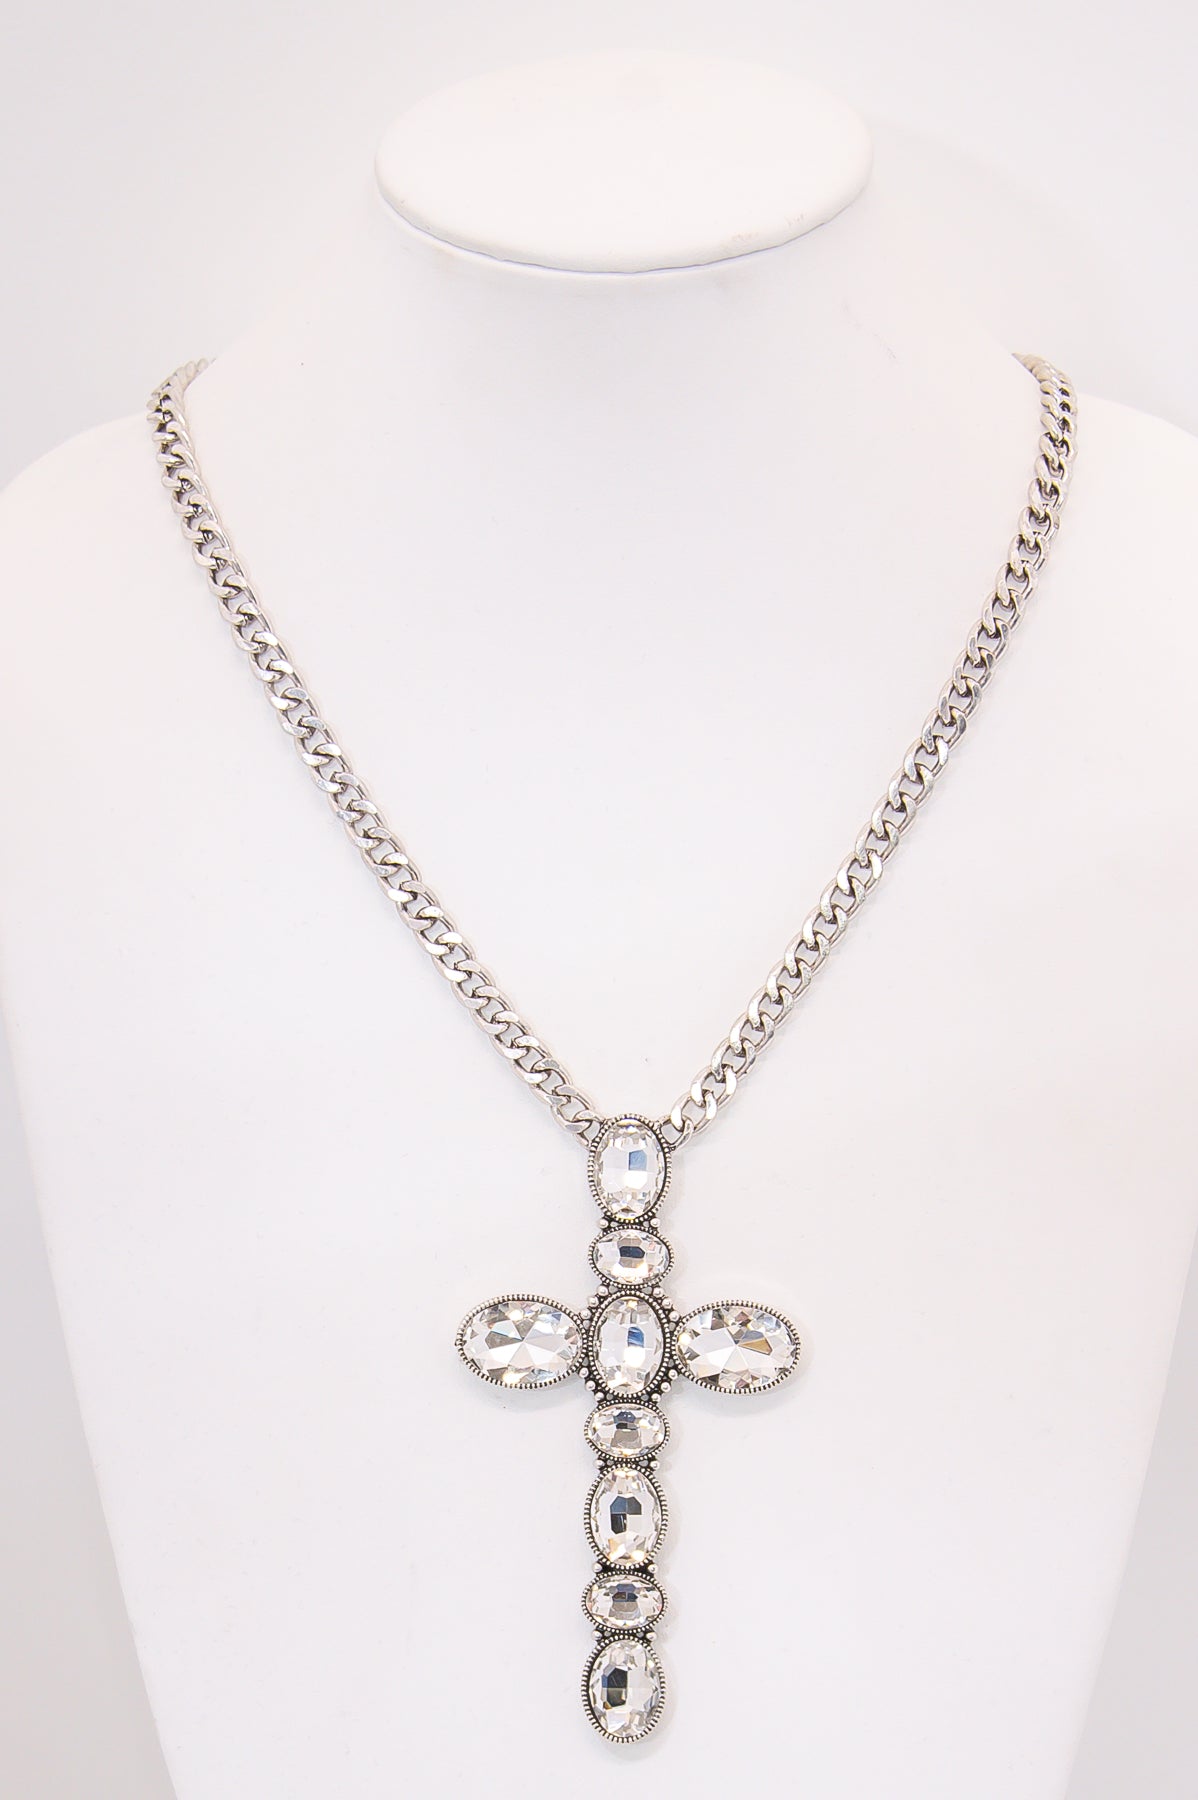 Silver Bling Chain Cross Statement Necklace - NEK4301SI